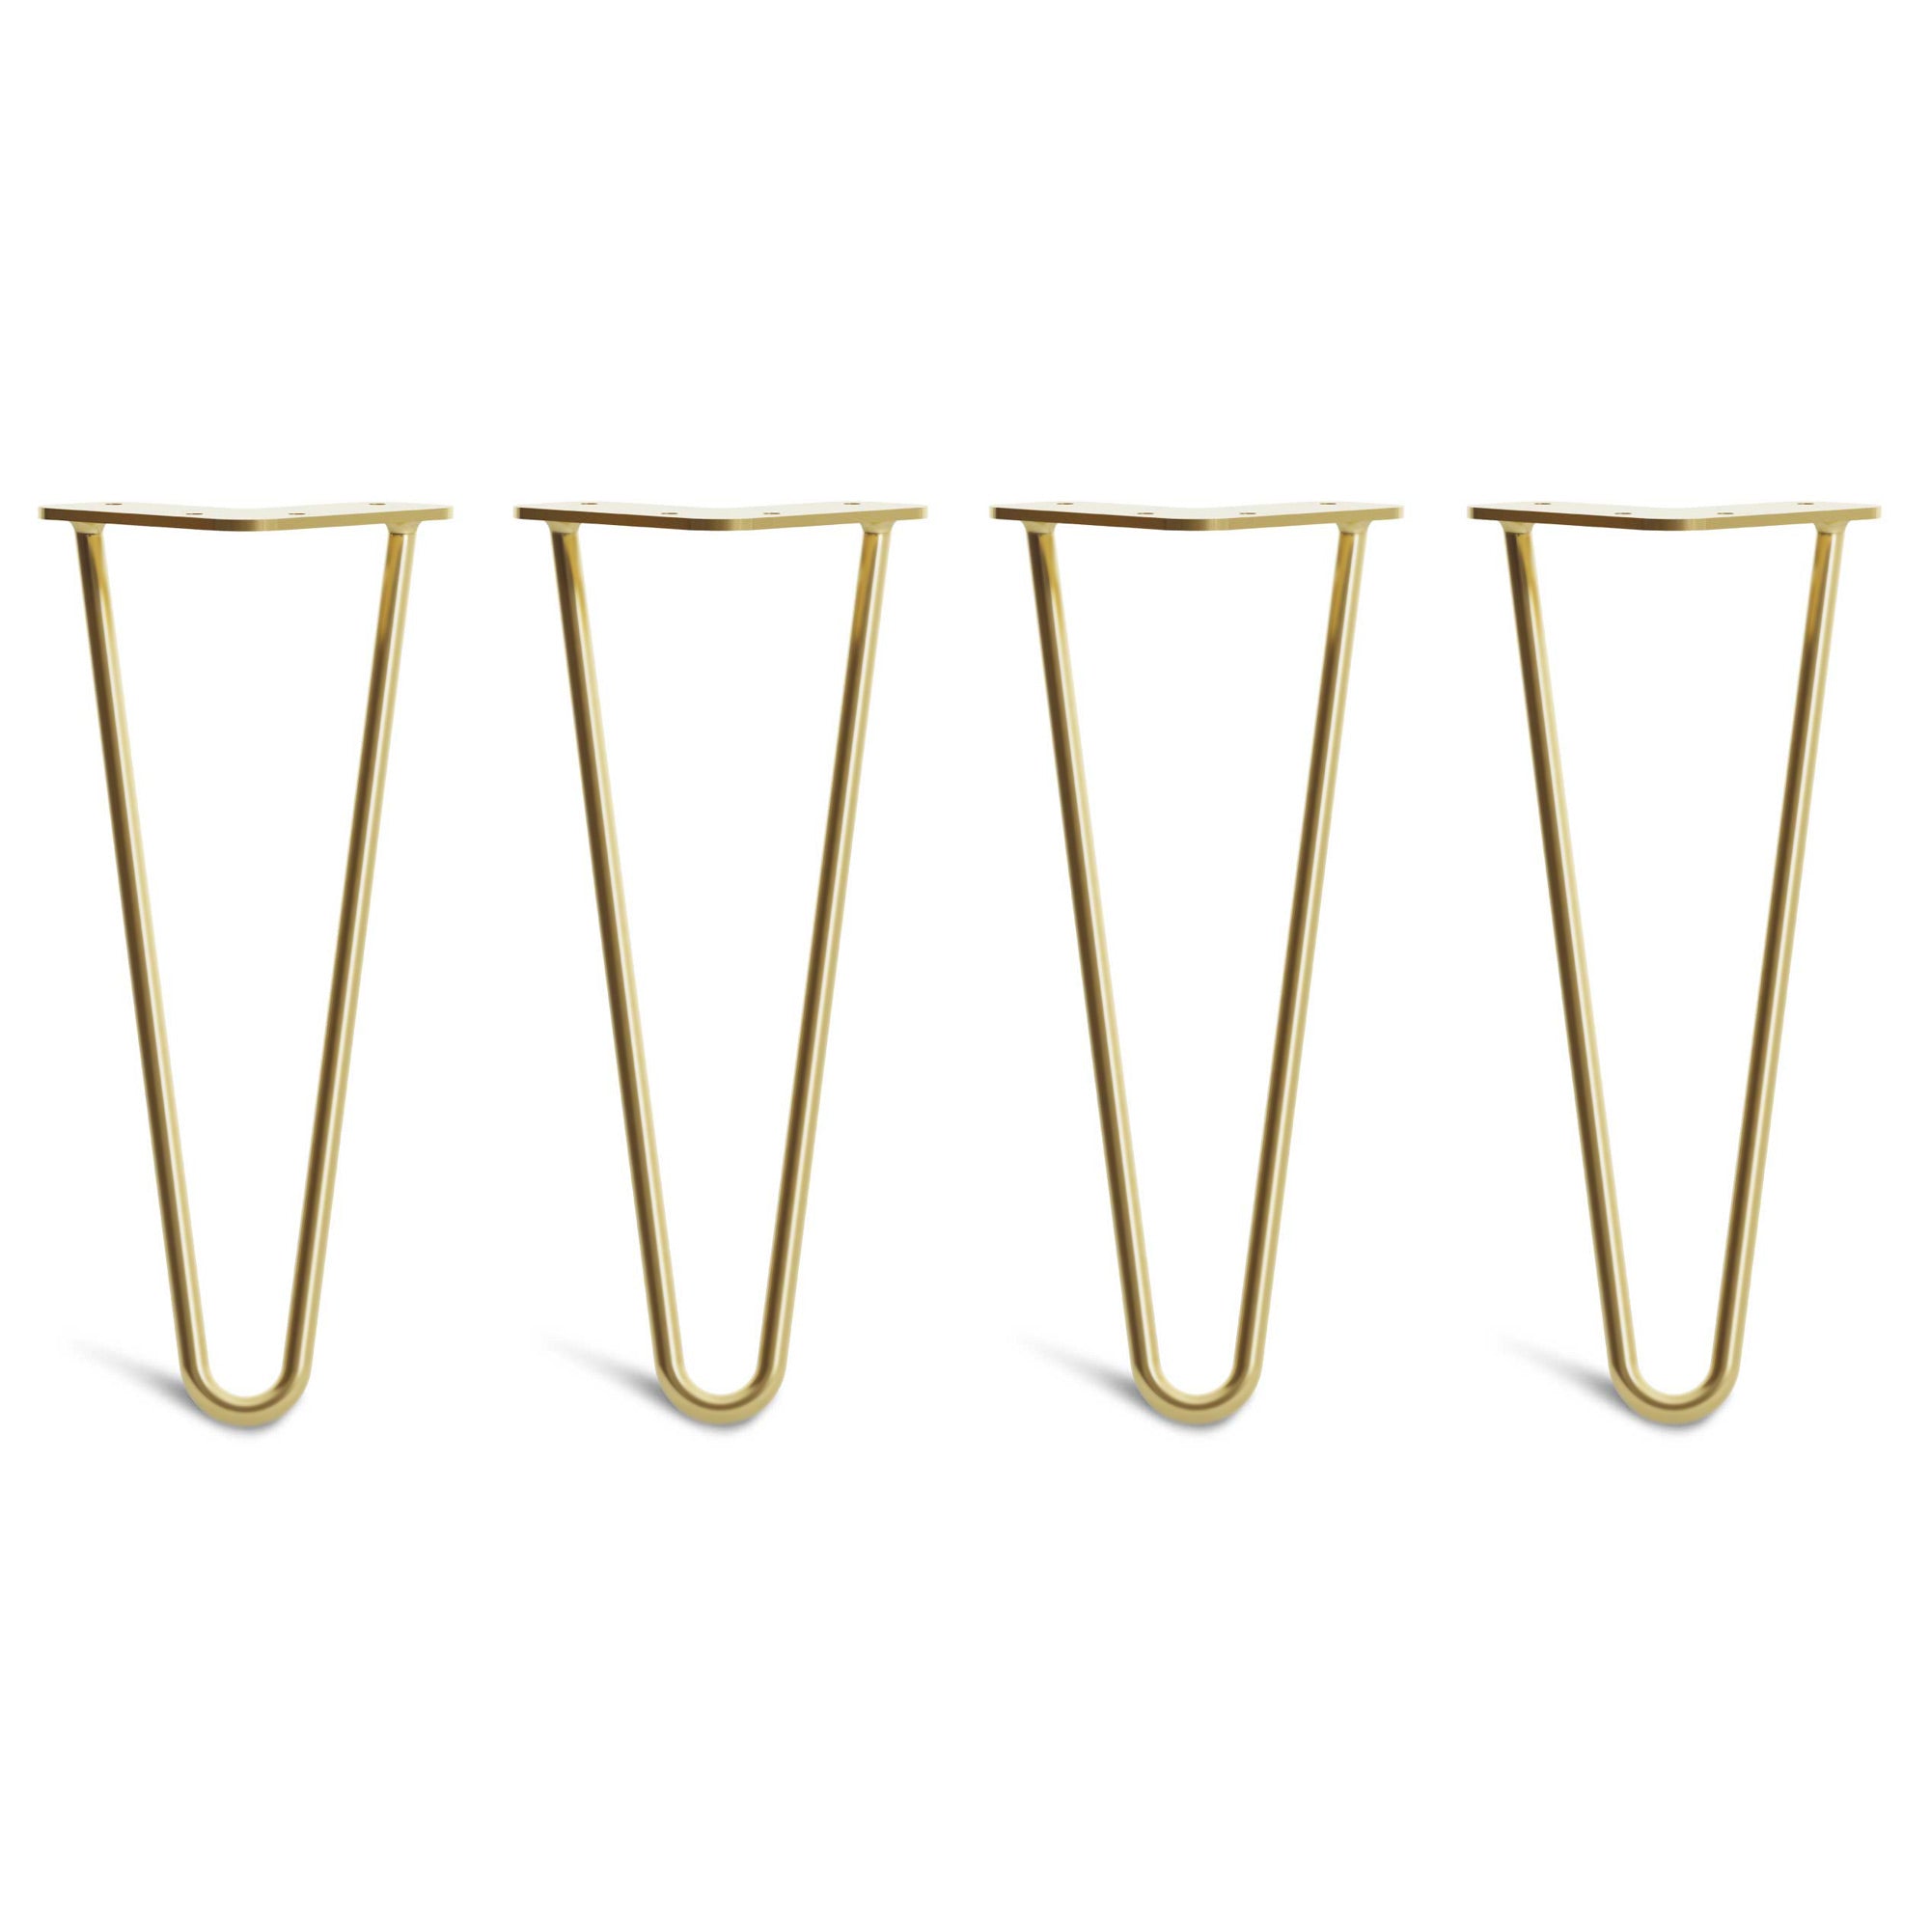 30cm Hairpin Legs - Low Coffee Table-2 Rod-Satin Brass-The Hairpin Leg Co.